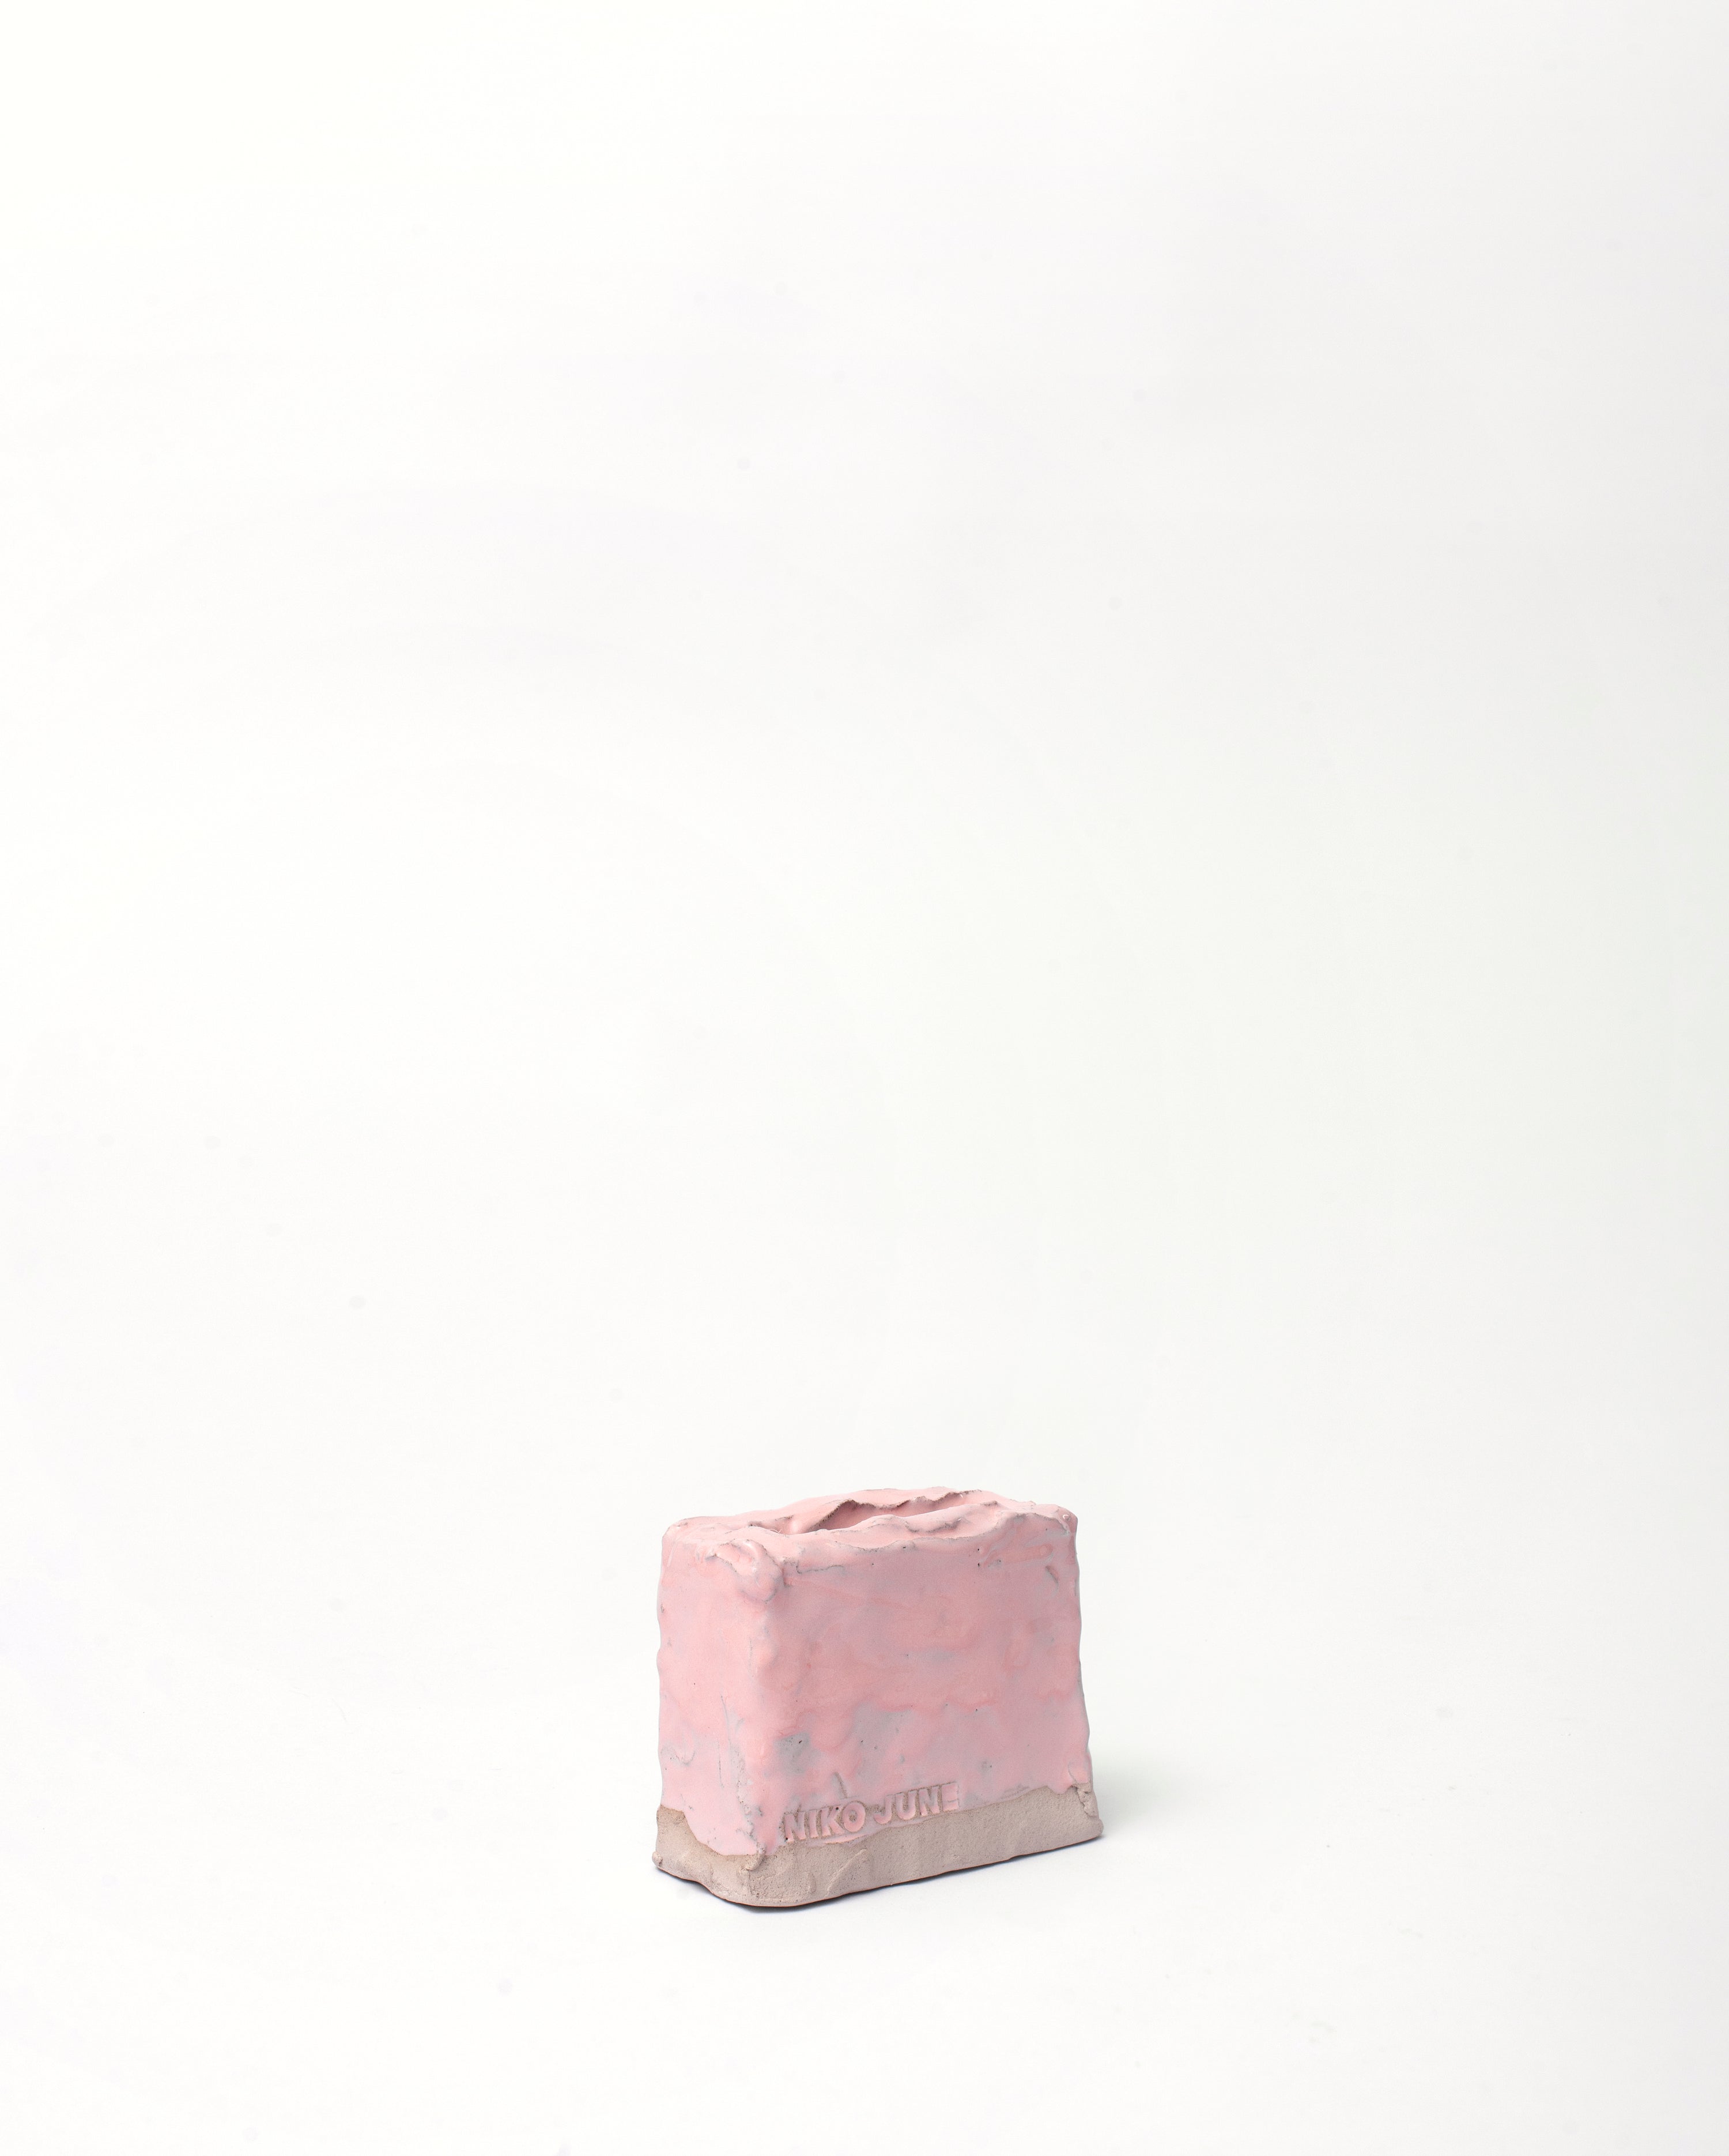 Handmade ceramic organizer object in pink glaze in left leaning position in white background